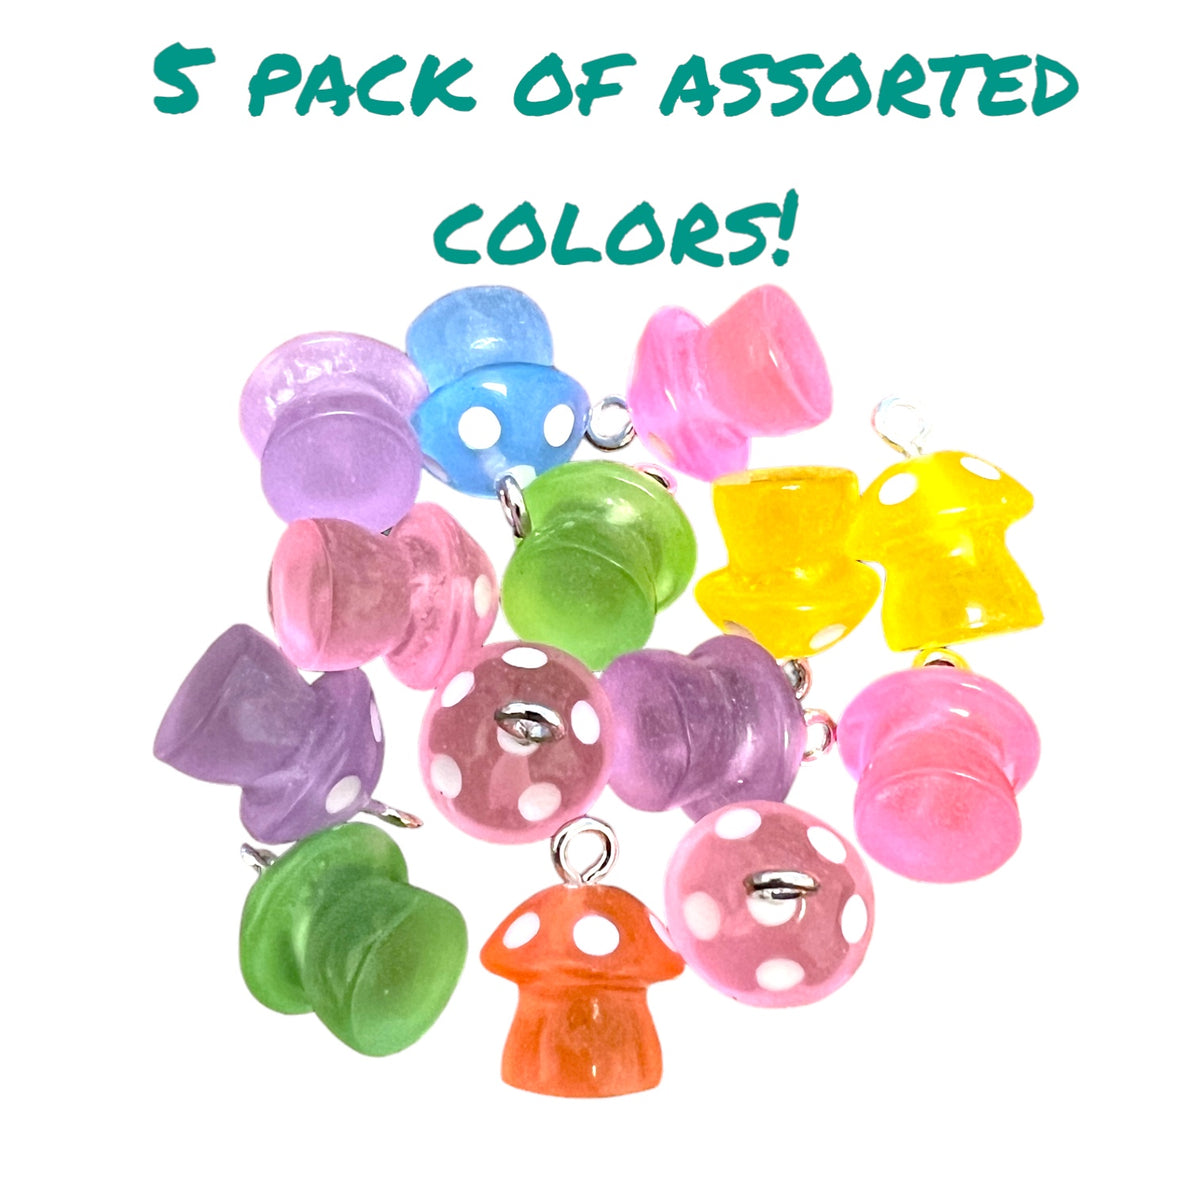 Mini Mushroom Pen or Keychain Charms - 5 Pack of Assorted Colors